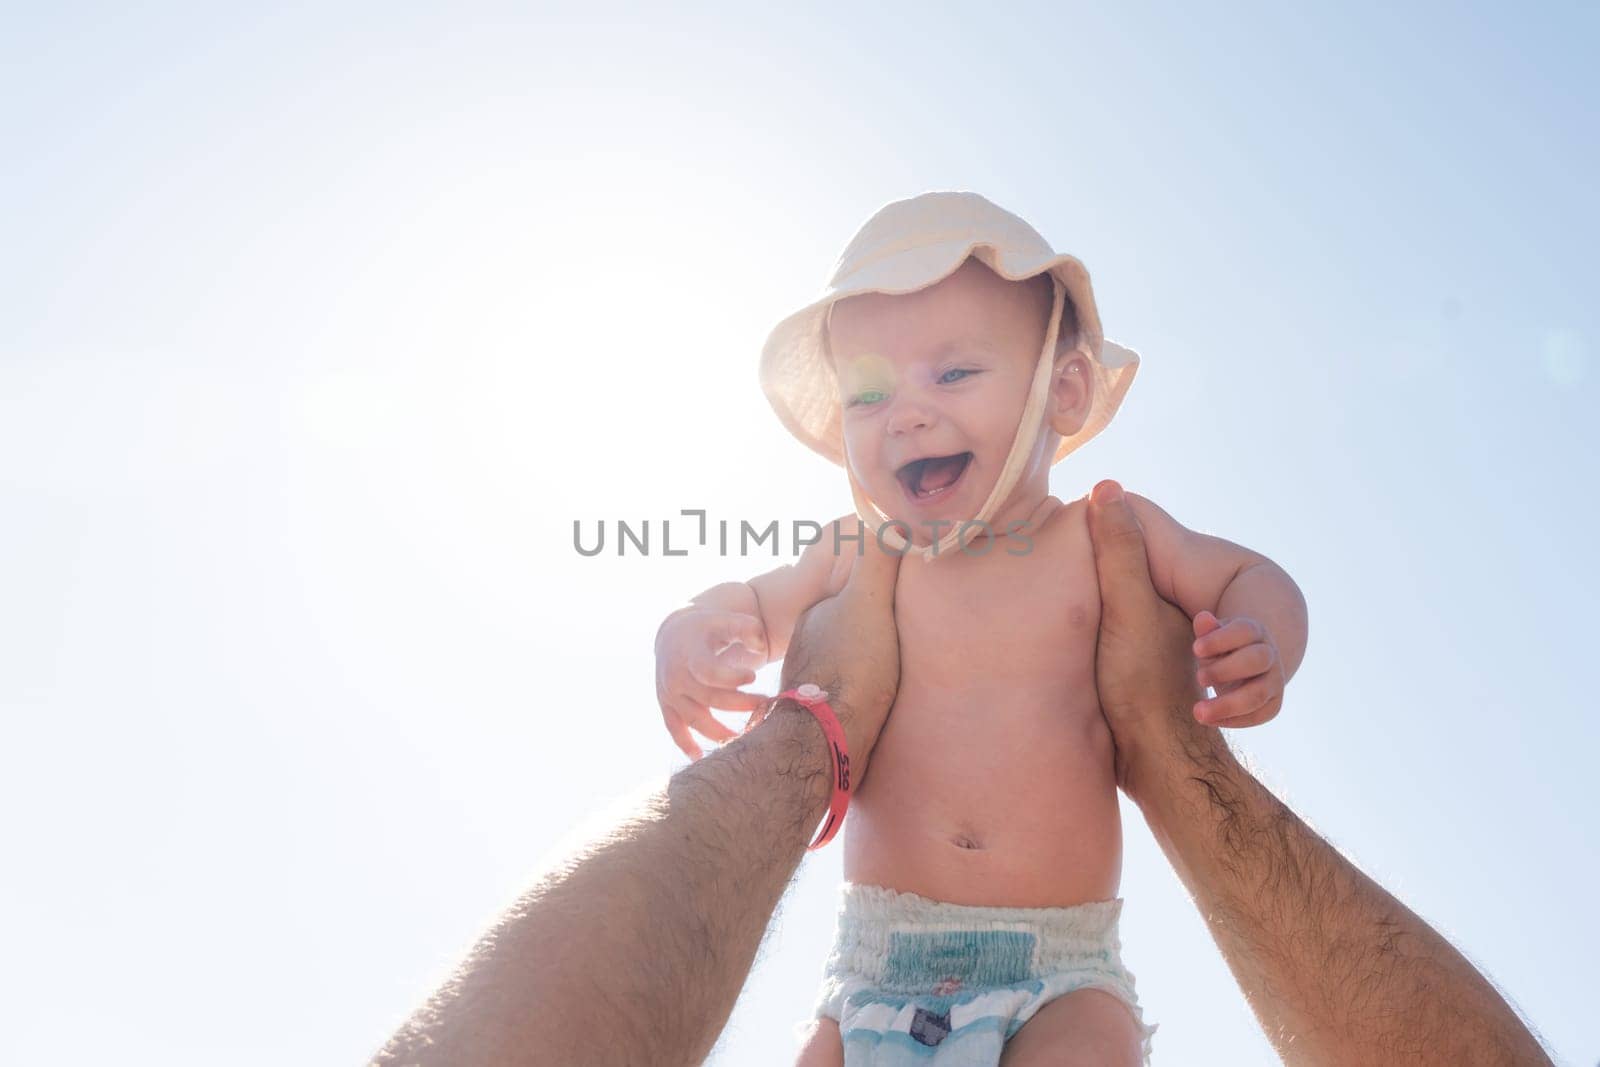 Father's hand lifts a joyful baby against a sunlit sky. Concept of paternal love and playful moments by Mariakray